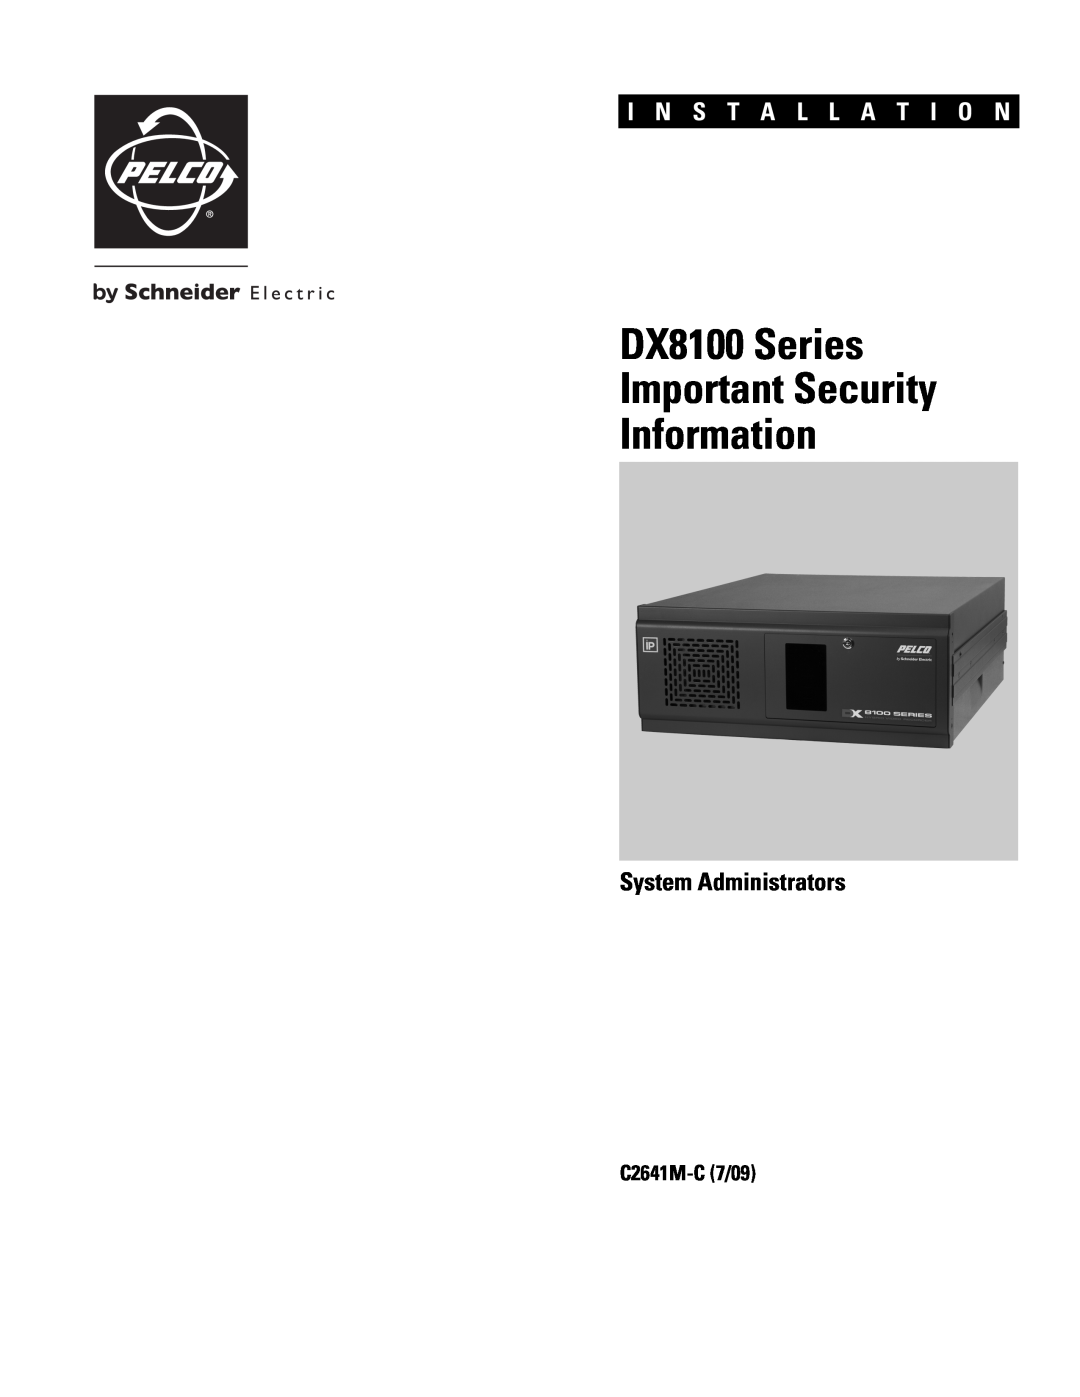 Pelco dx8100 manual System Administrators, C2641M-C7/09, DX8100 Series Important Security Information 